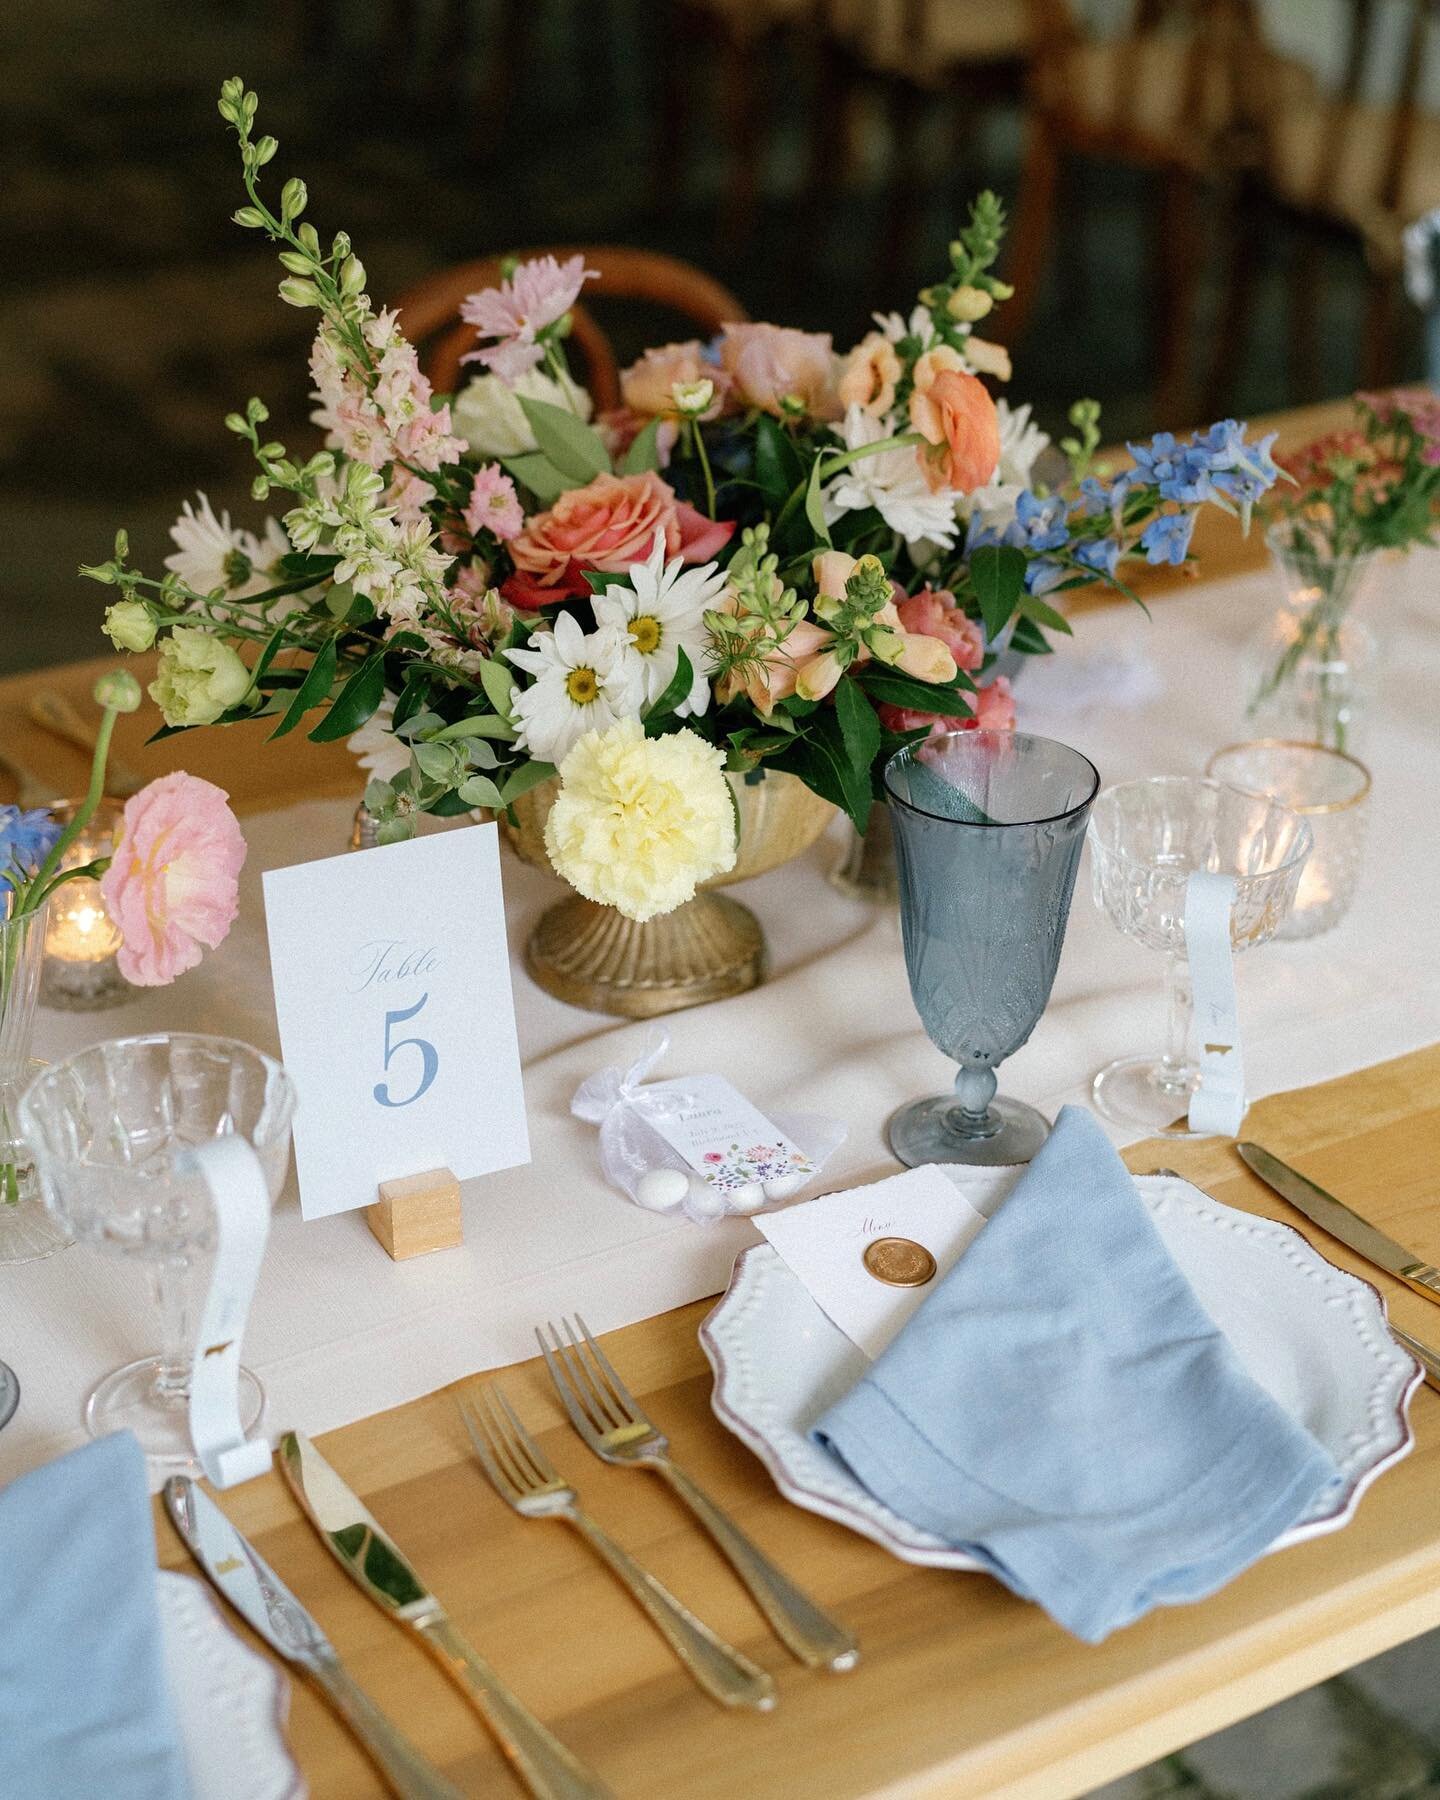 ✨ Day-of stationery for Laura &amp; Alex ✨ Worked with @dantusandcoevents to create a beautiful collection of custom table numbers, drink scrolls w/name &amp; meal choice, handmade paper menus w/wax seals, and signage ✨

Photographer: @elosiniophoto
